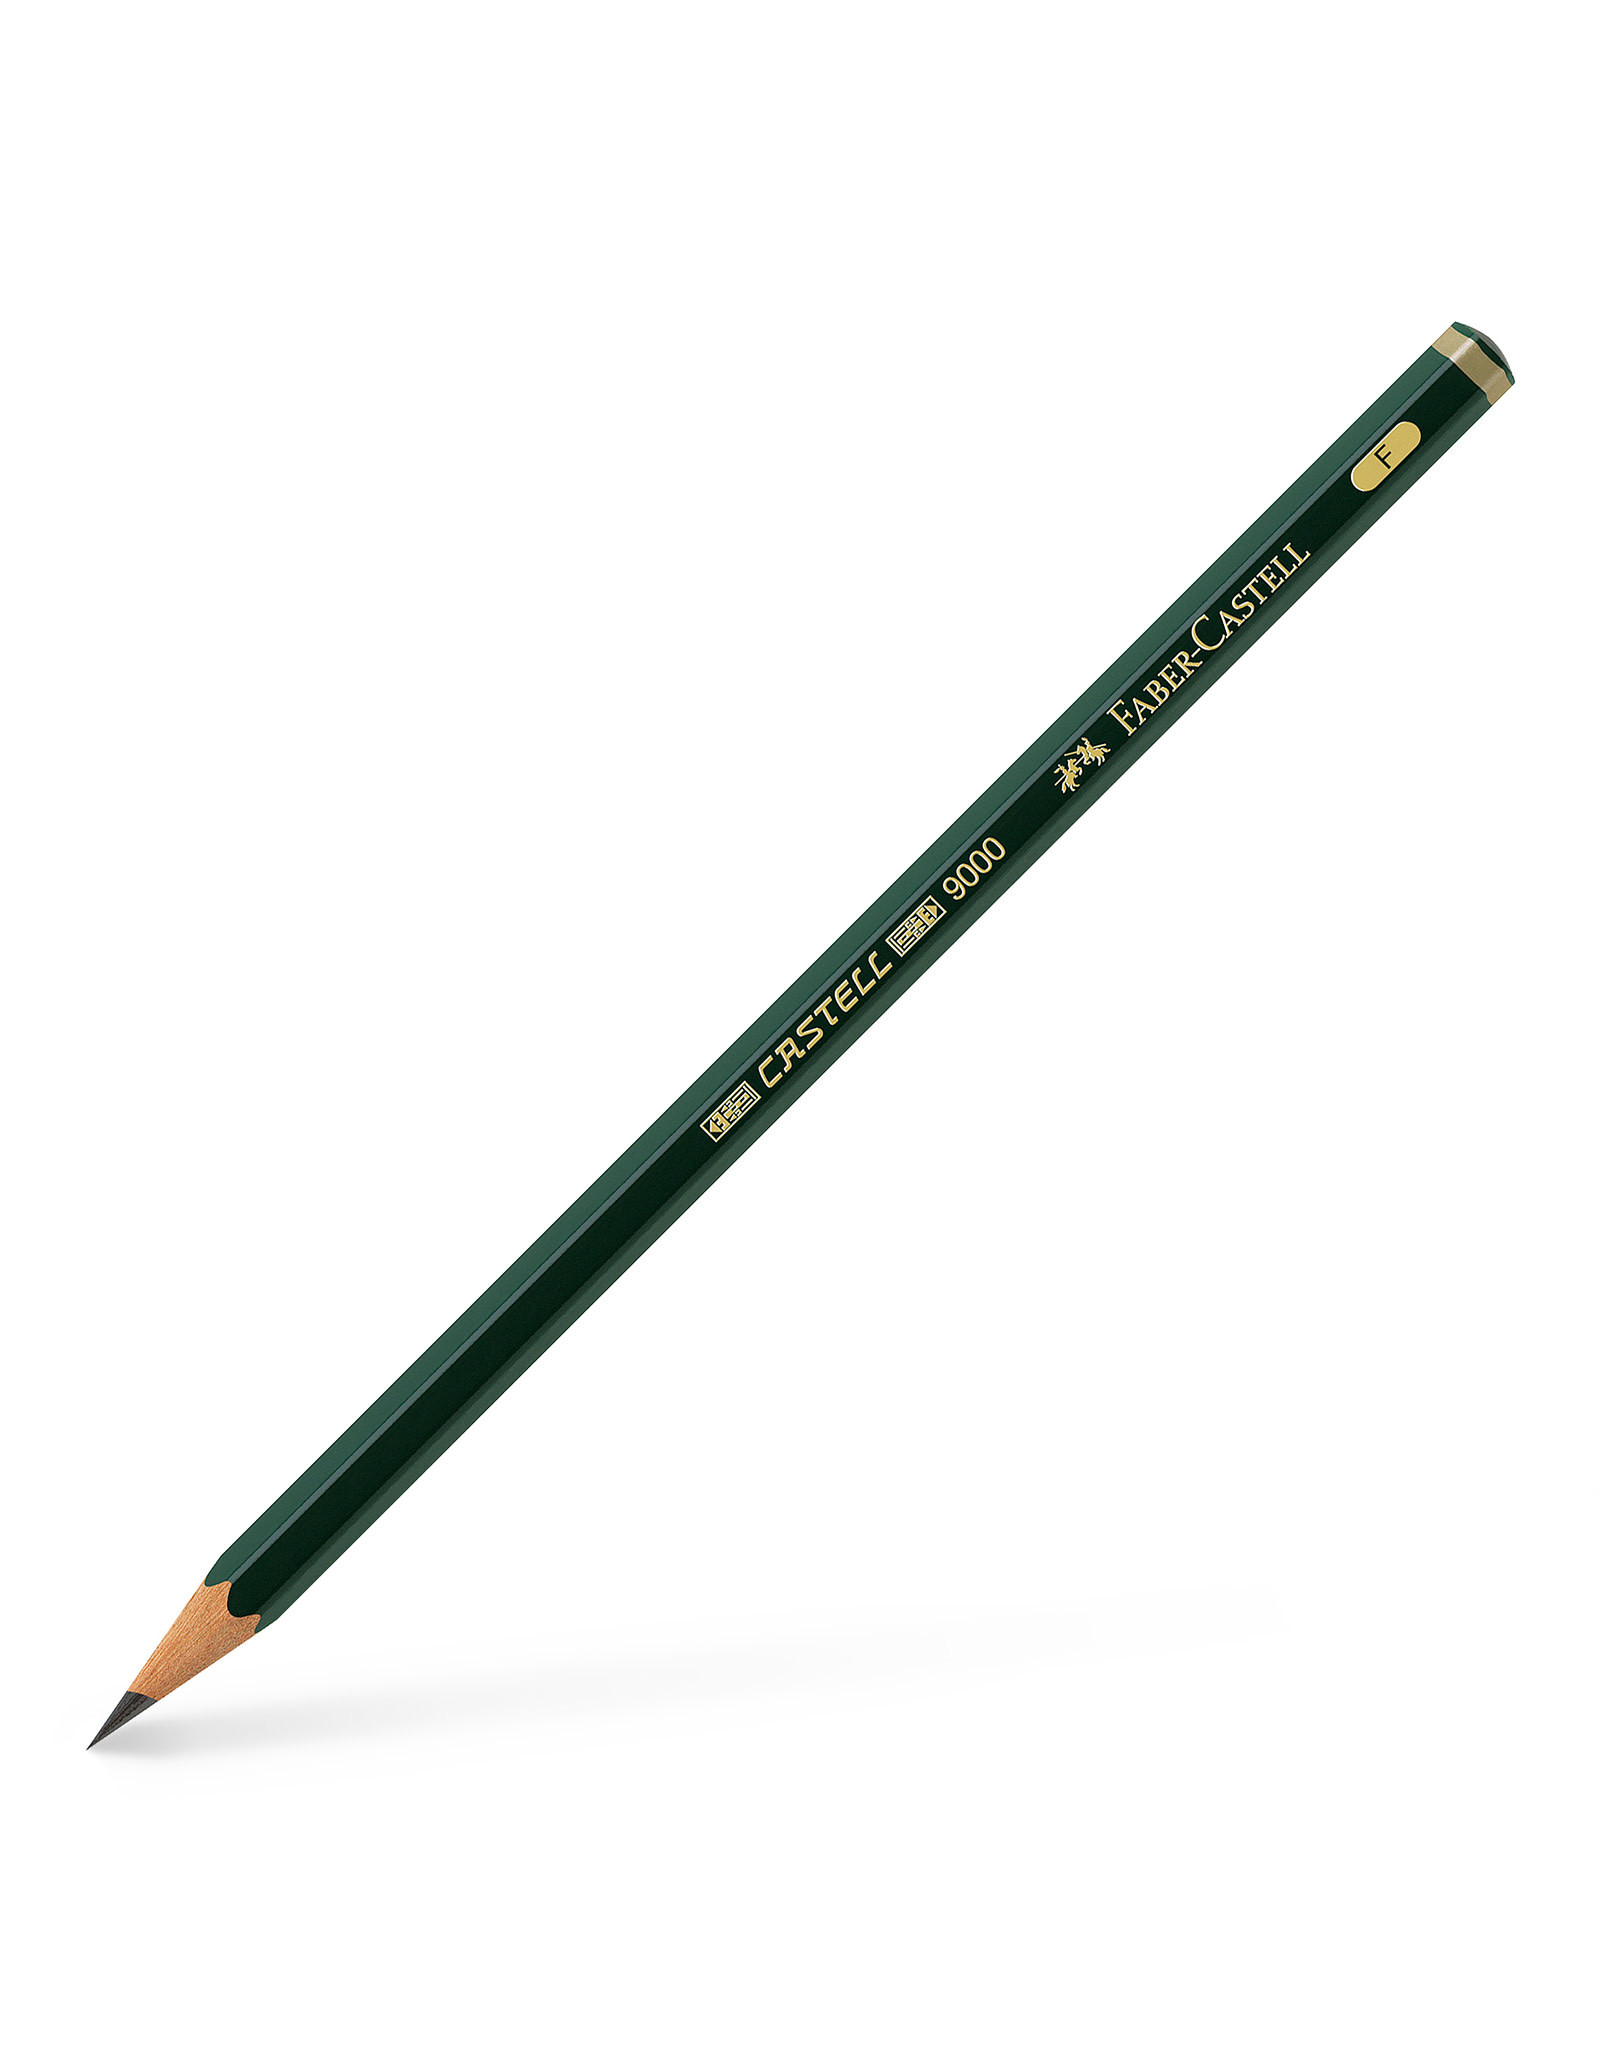 FABER-CASTELL Castell® 9000 Graphite Pencil, F